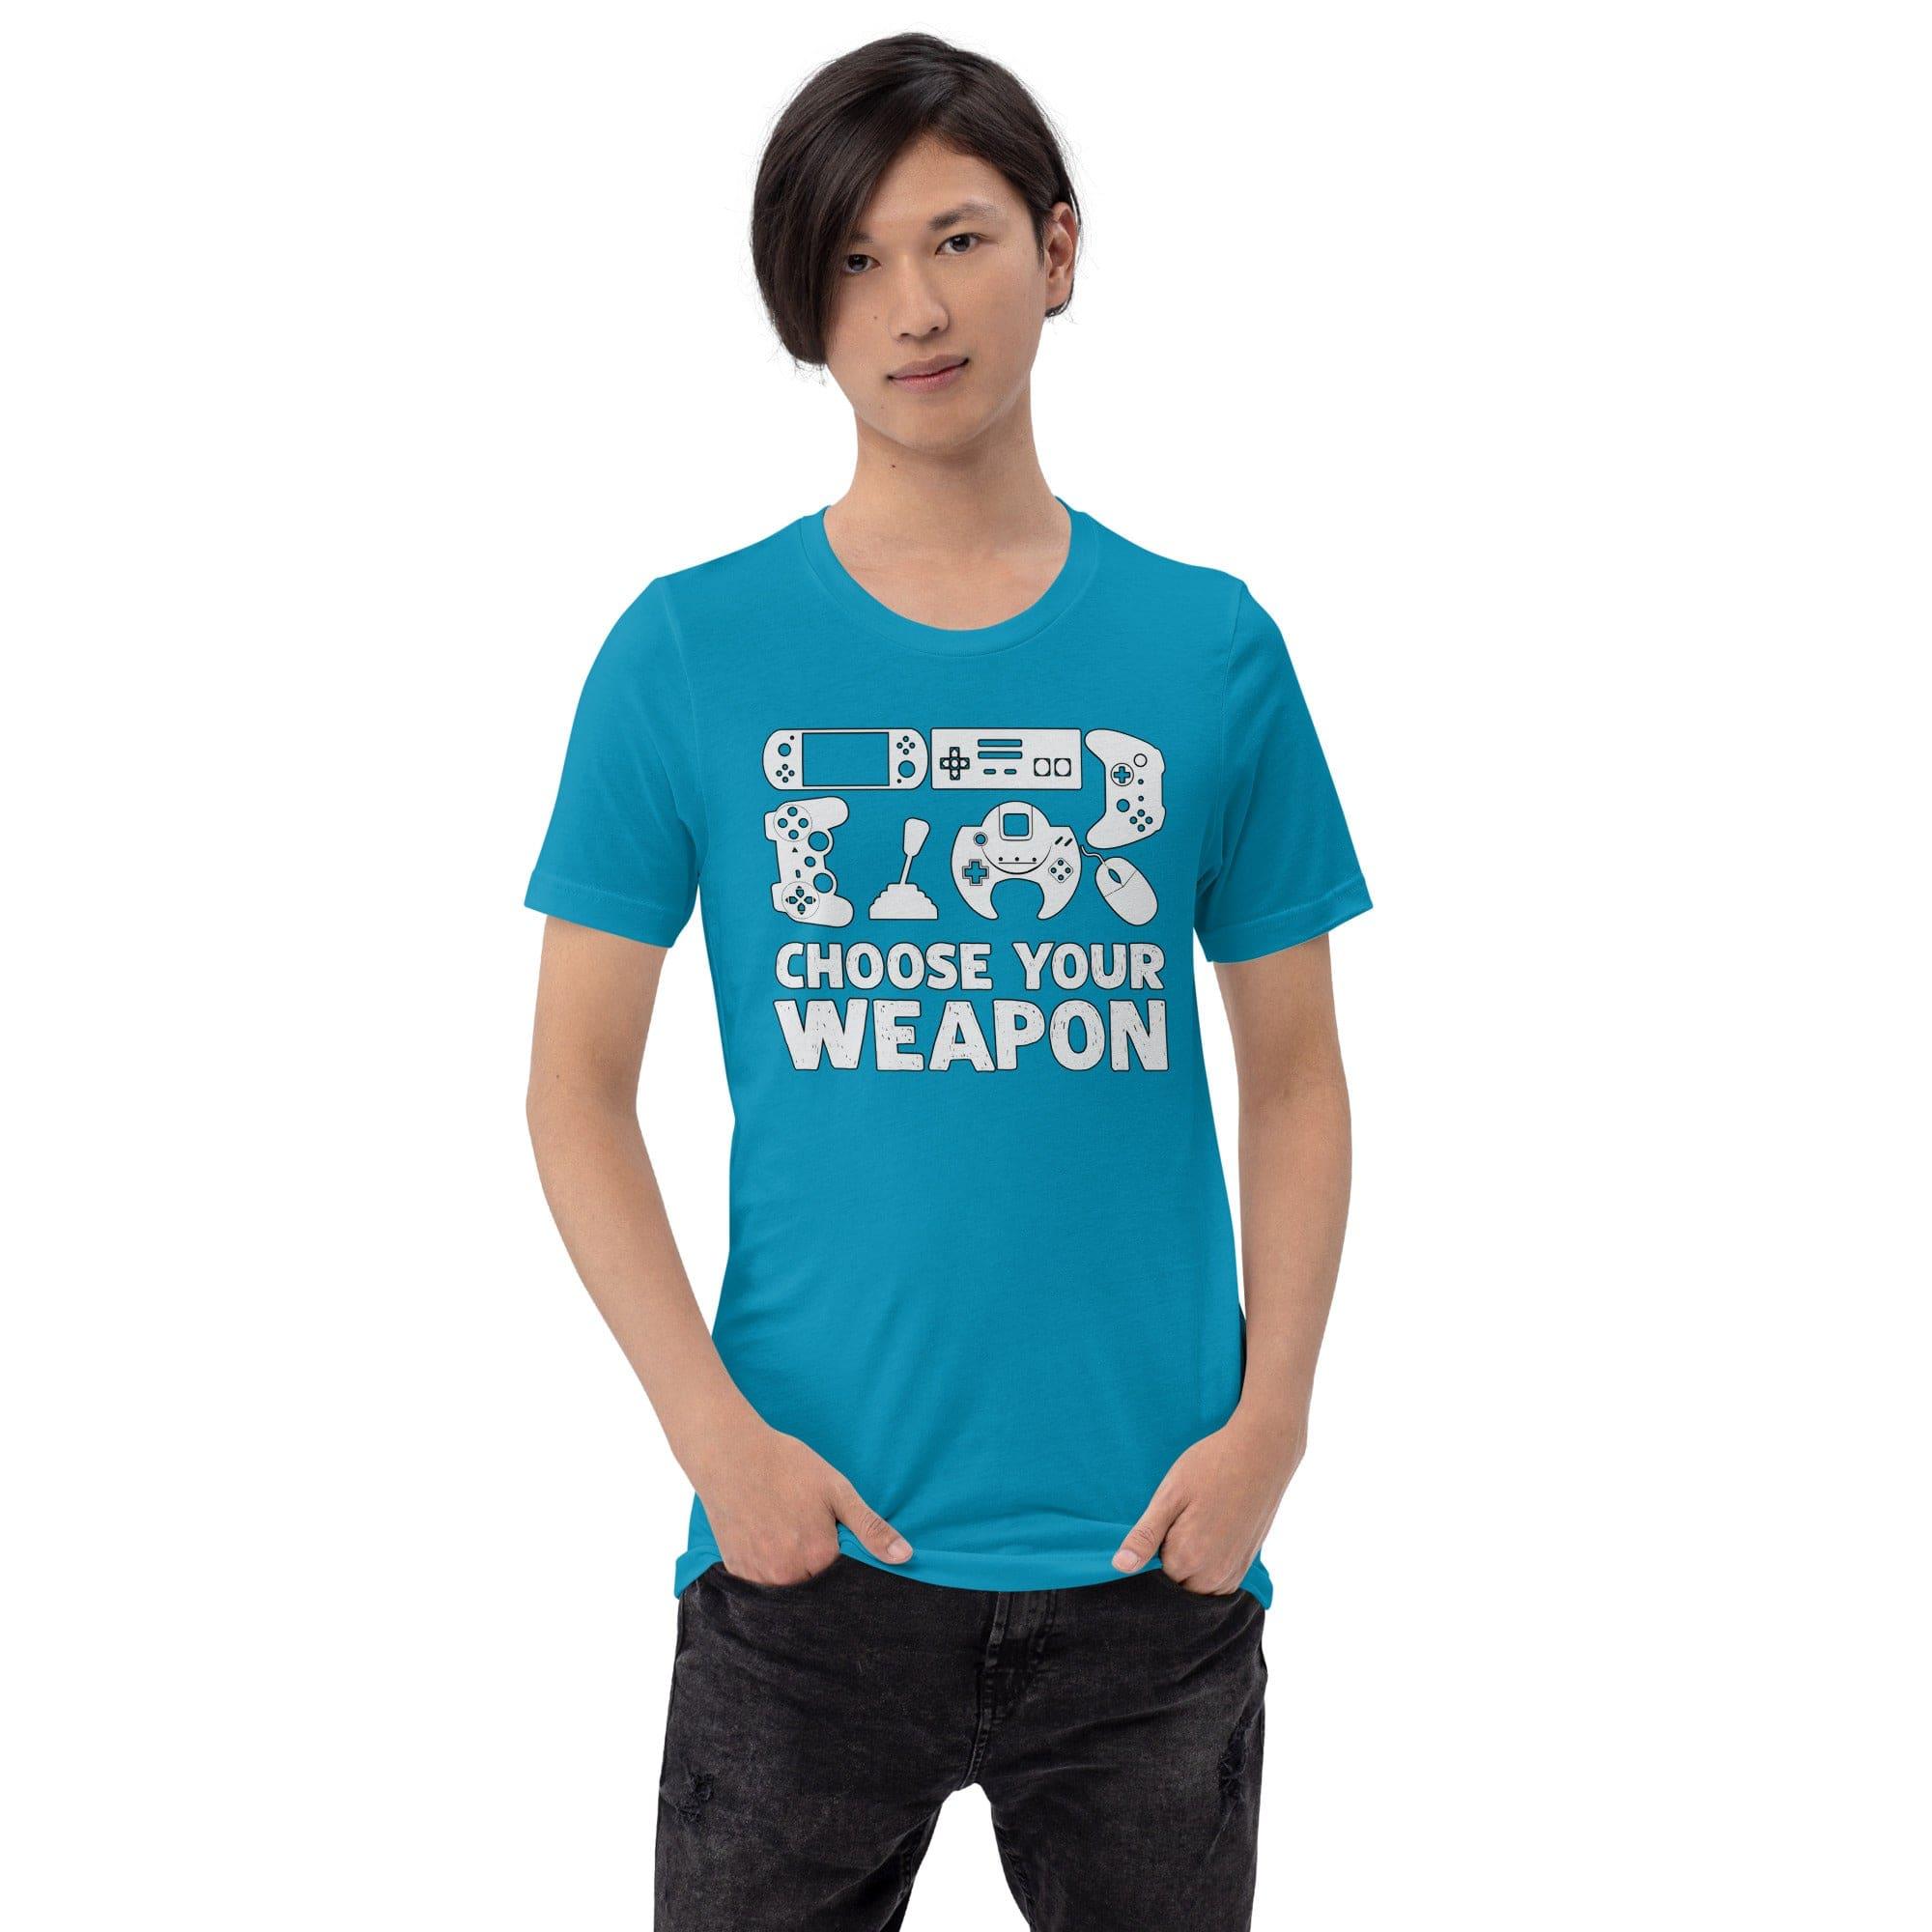 Gamer T-Shirt Choose Your Weapon Multiple Game Controllers Short Sleeve Unisex Top - TopKoalaTee